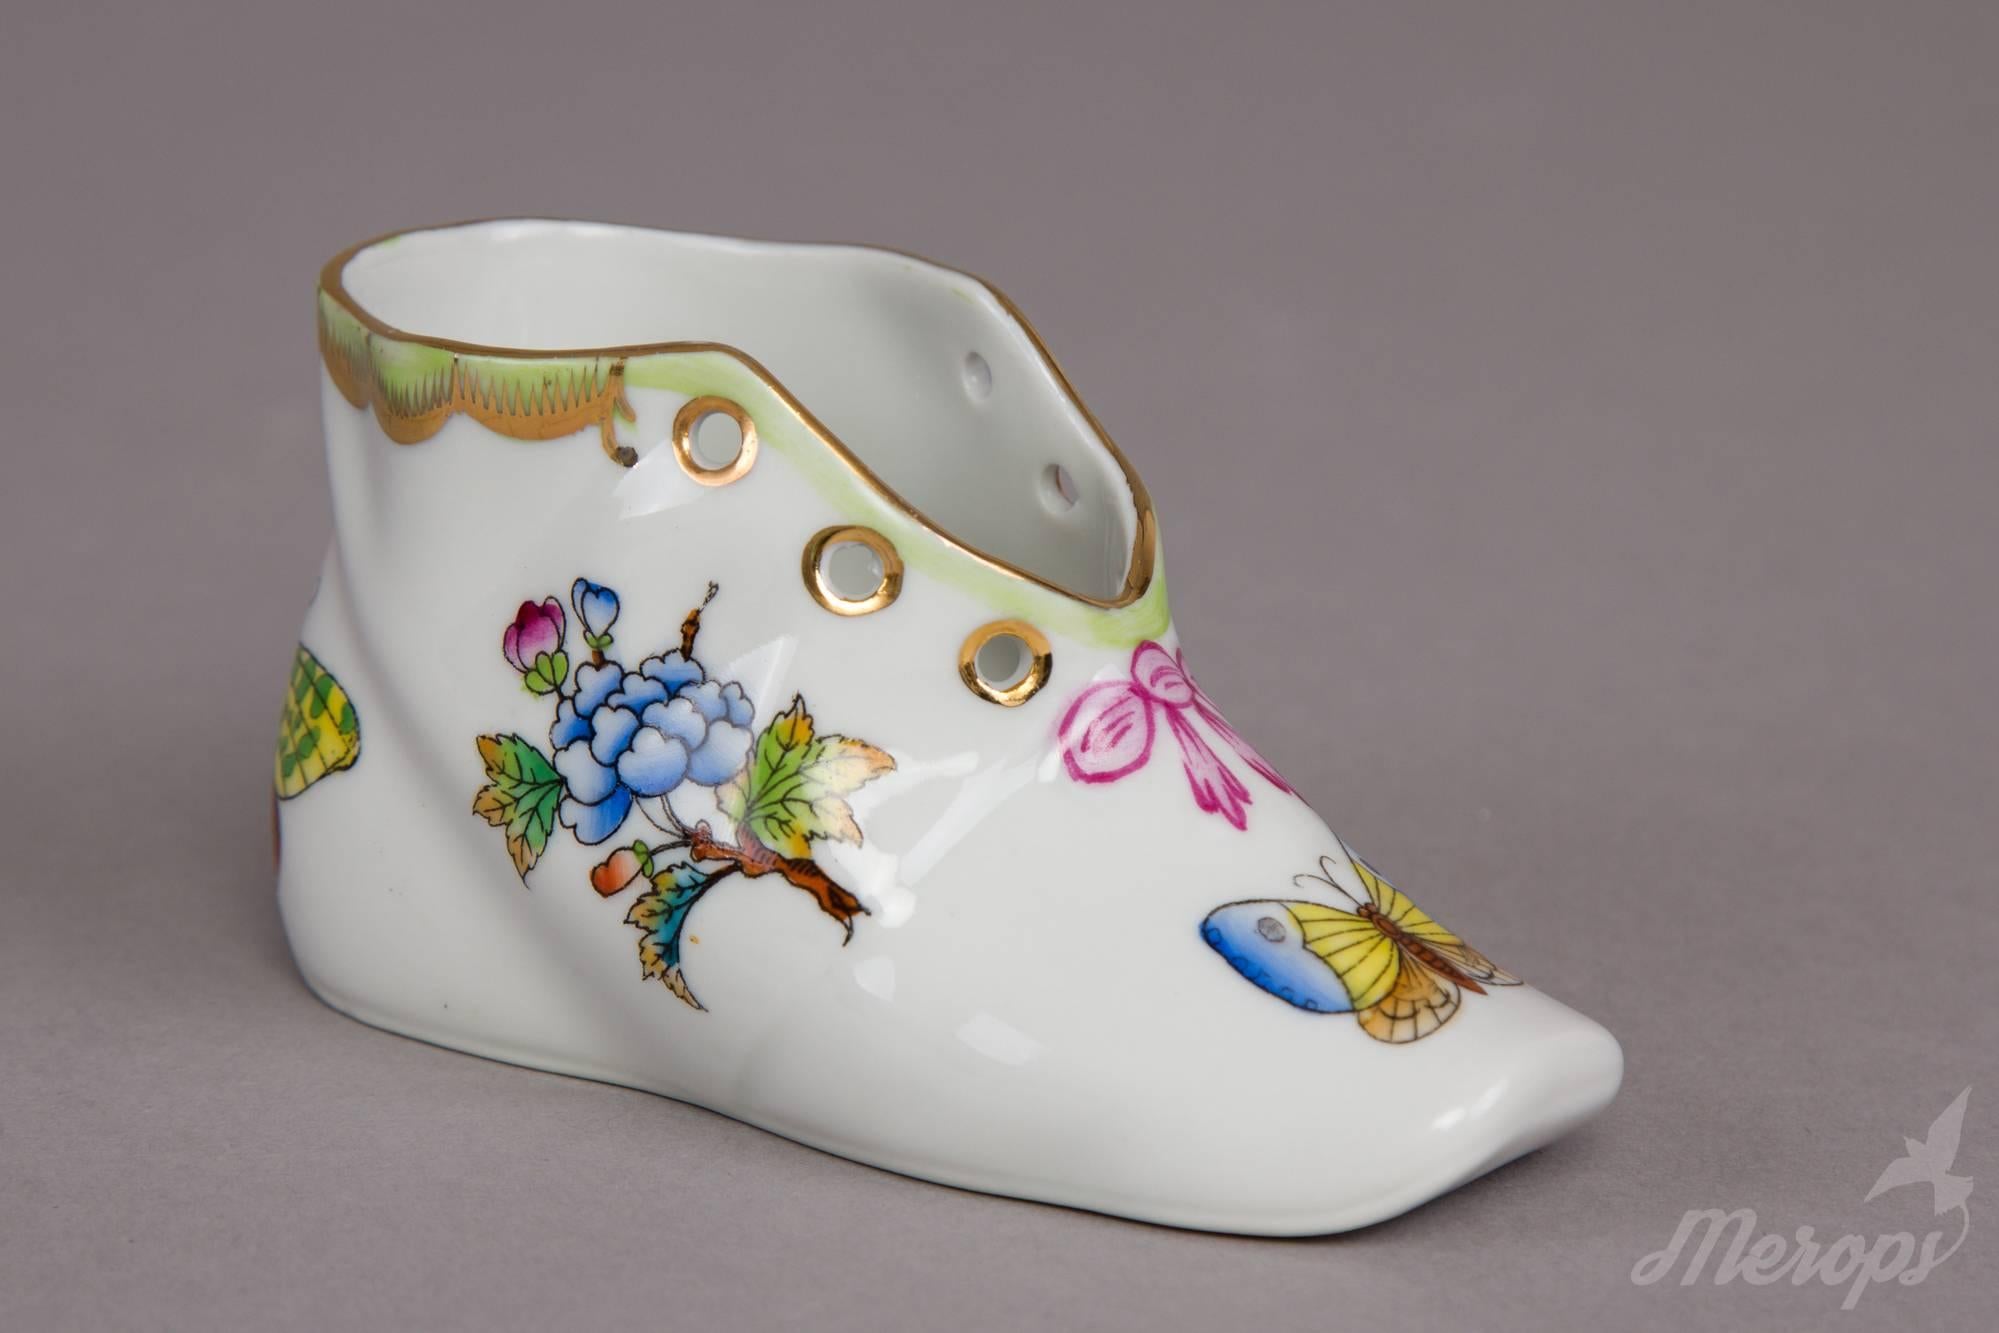 We ship this item worldwide for 30 USD with insurance. Shipping usually takes 5-10 business days. Express shipping with FedEx (2 days) available for 60 USD. 

Manufacturer: Herend Porcelain Manufactory (Hungary).
Quality: Hand-painted, 1st